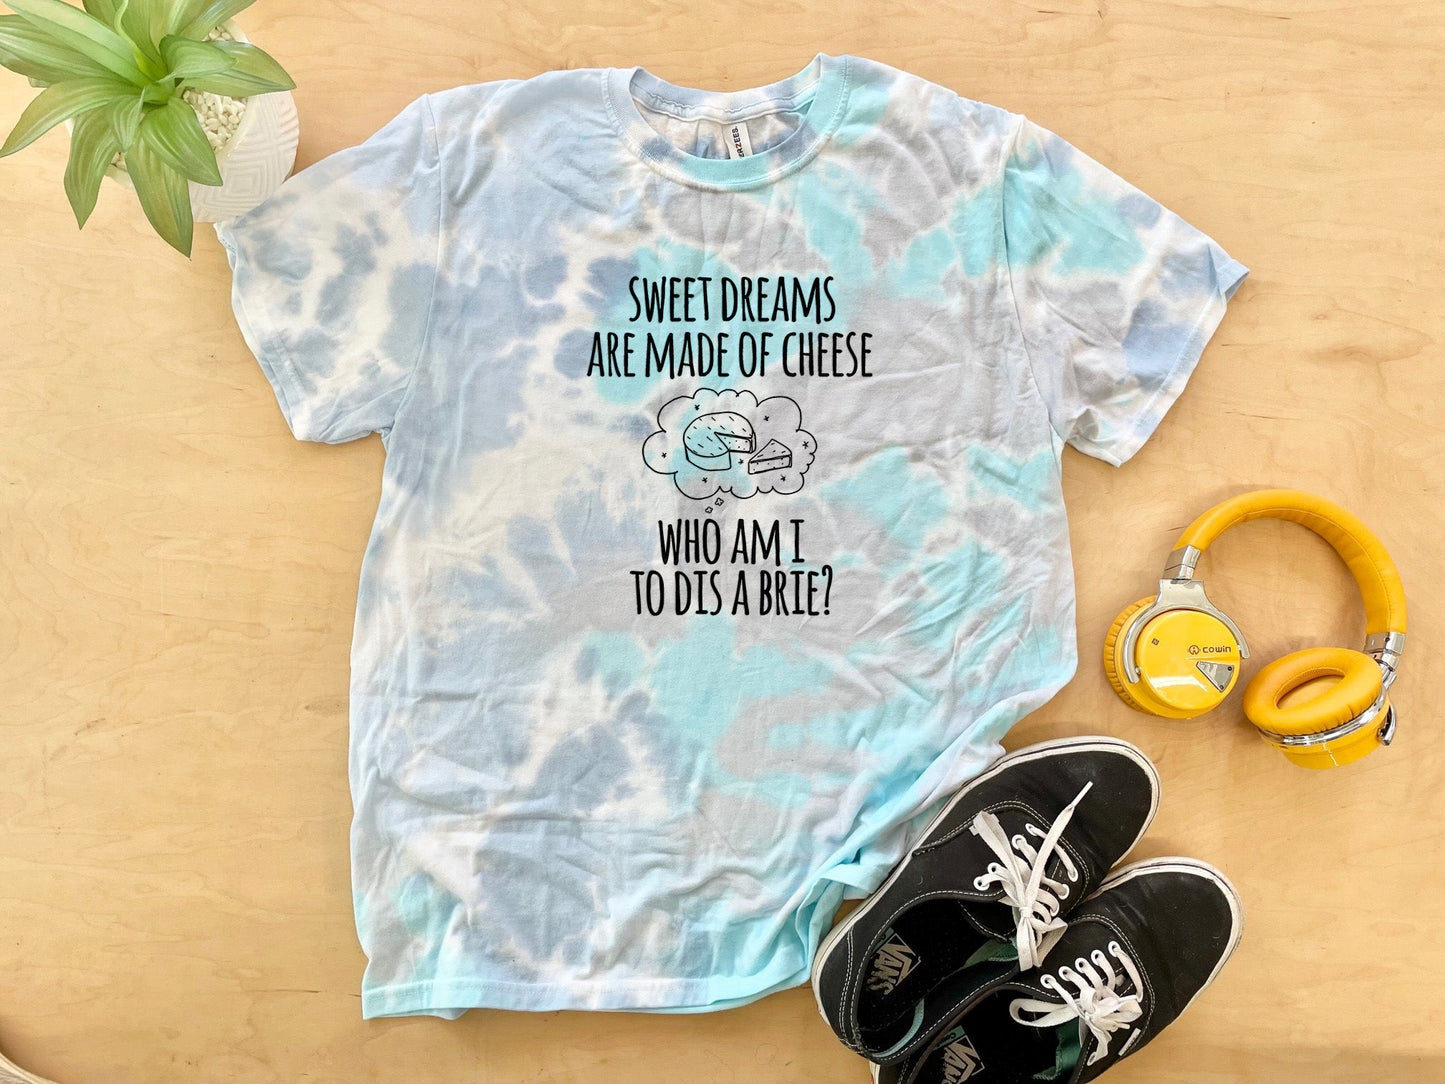 Sweet Dreams Are Made Of Cheese, Who Am I To Dis A Brie? - Mens/Unisex Tie Dye Tee - Blue